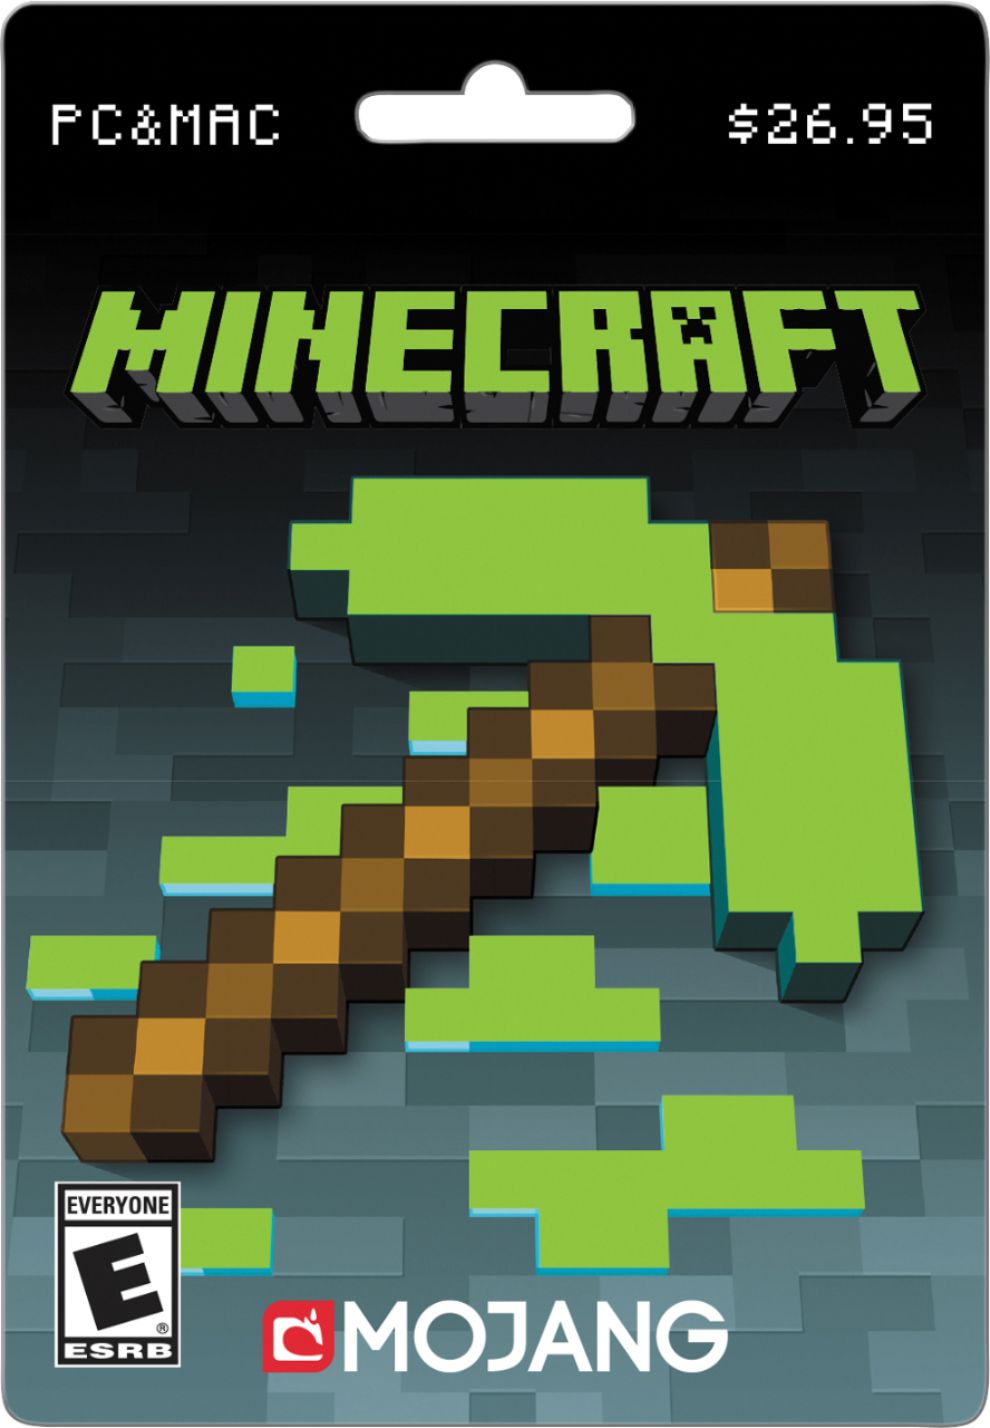 pc or mac for minecraft